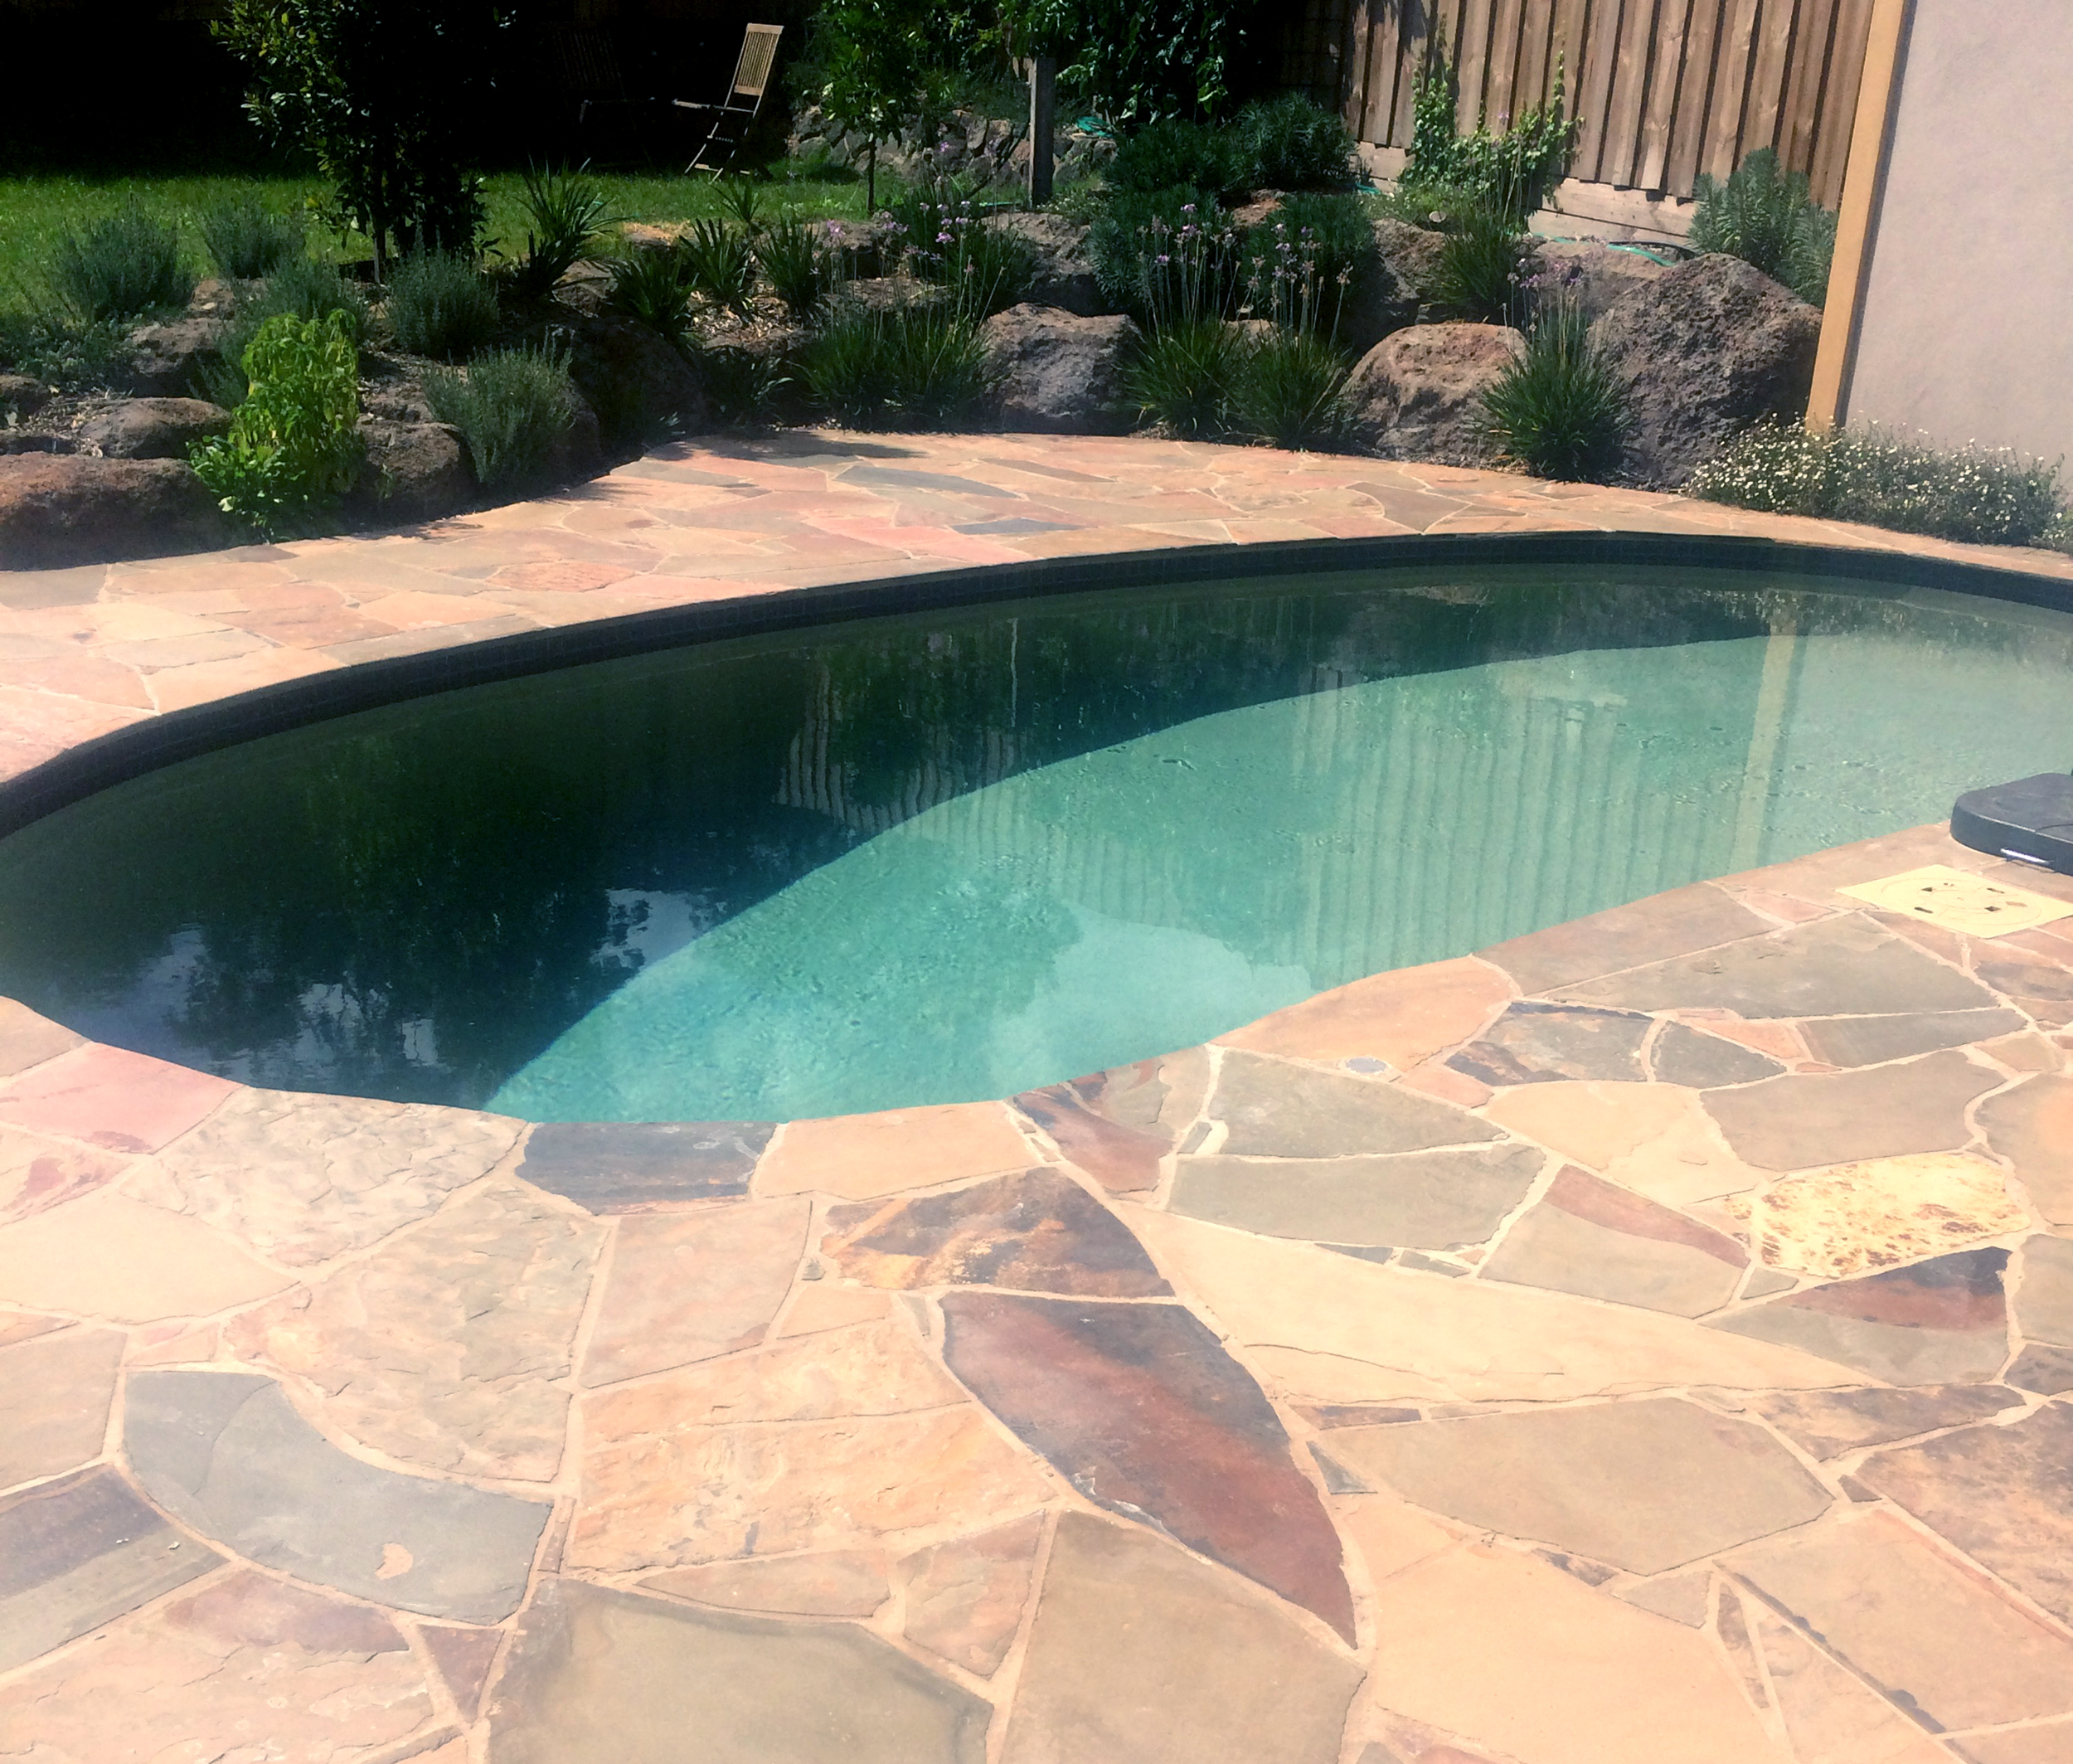  Crazy Paving in Kruger Slate around Pool as Coping 